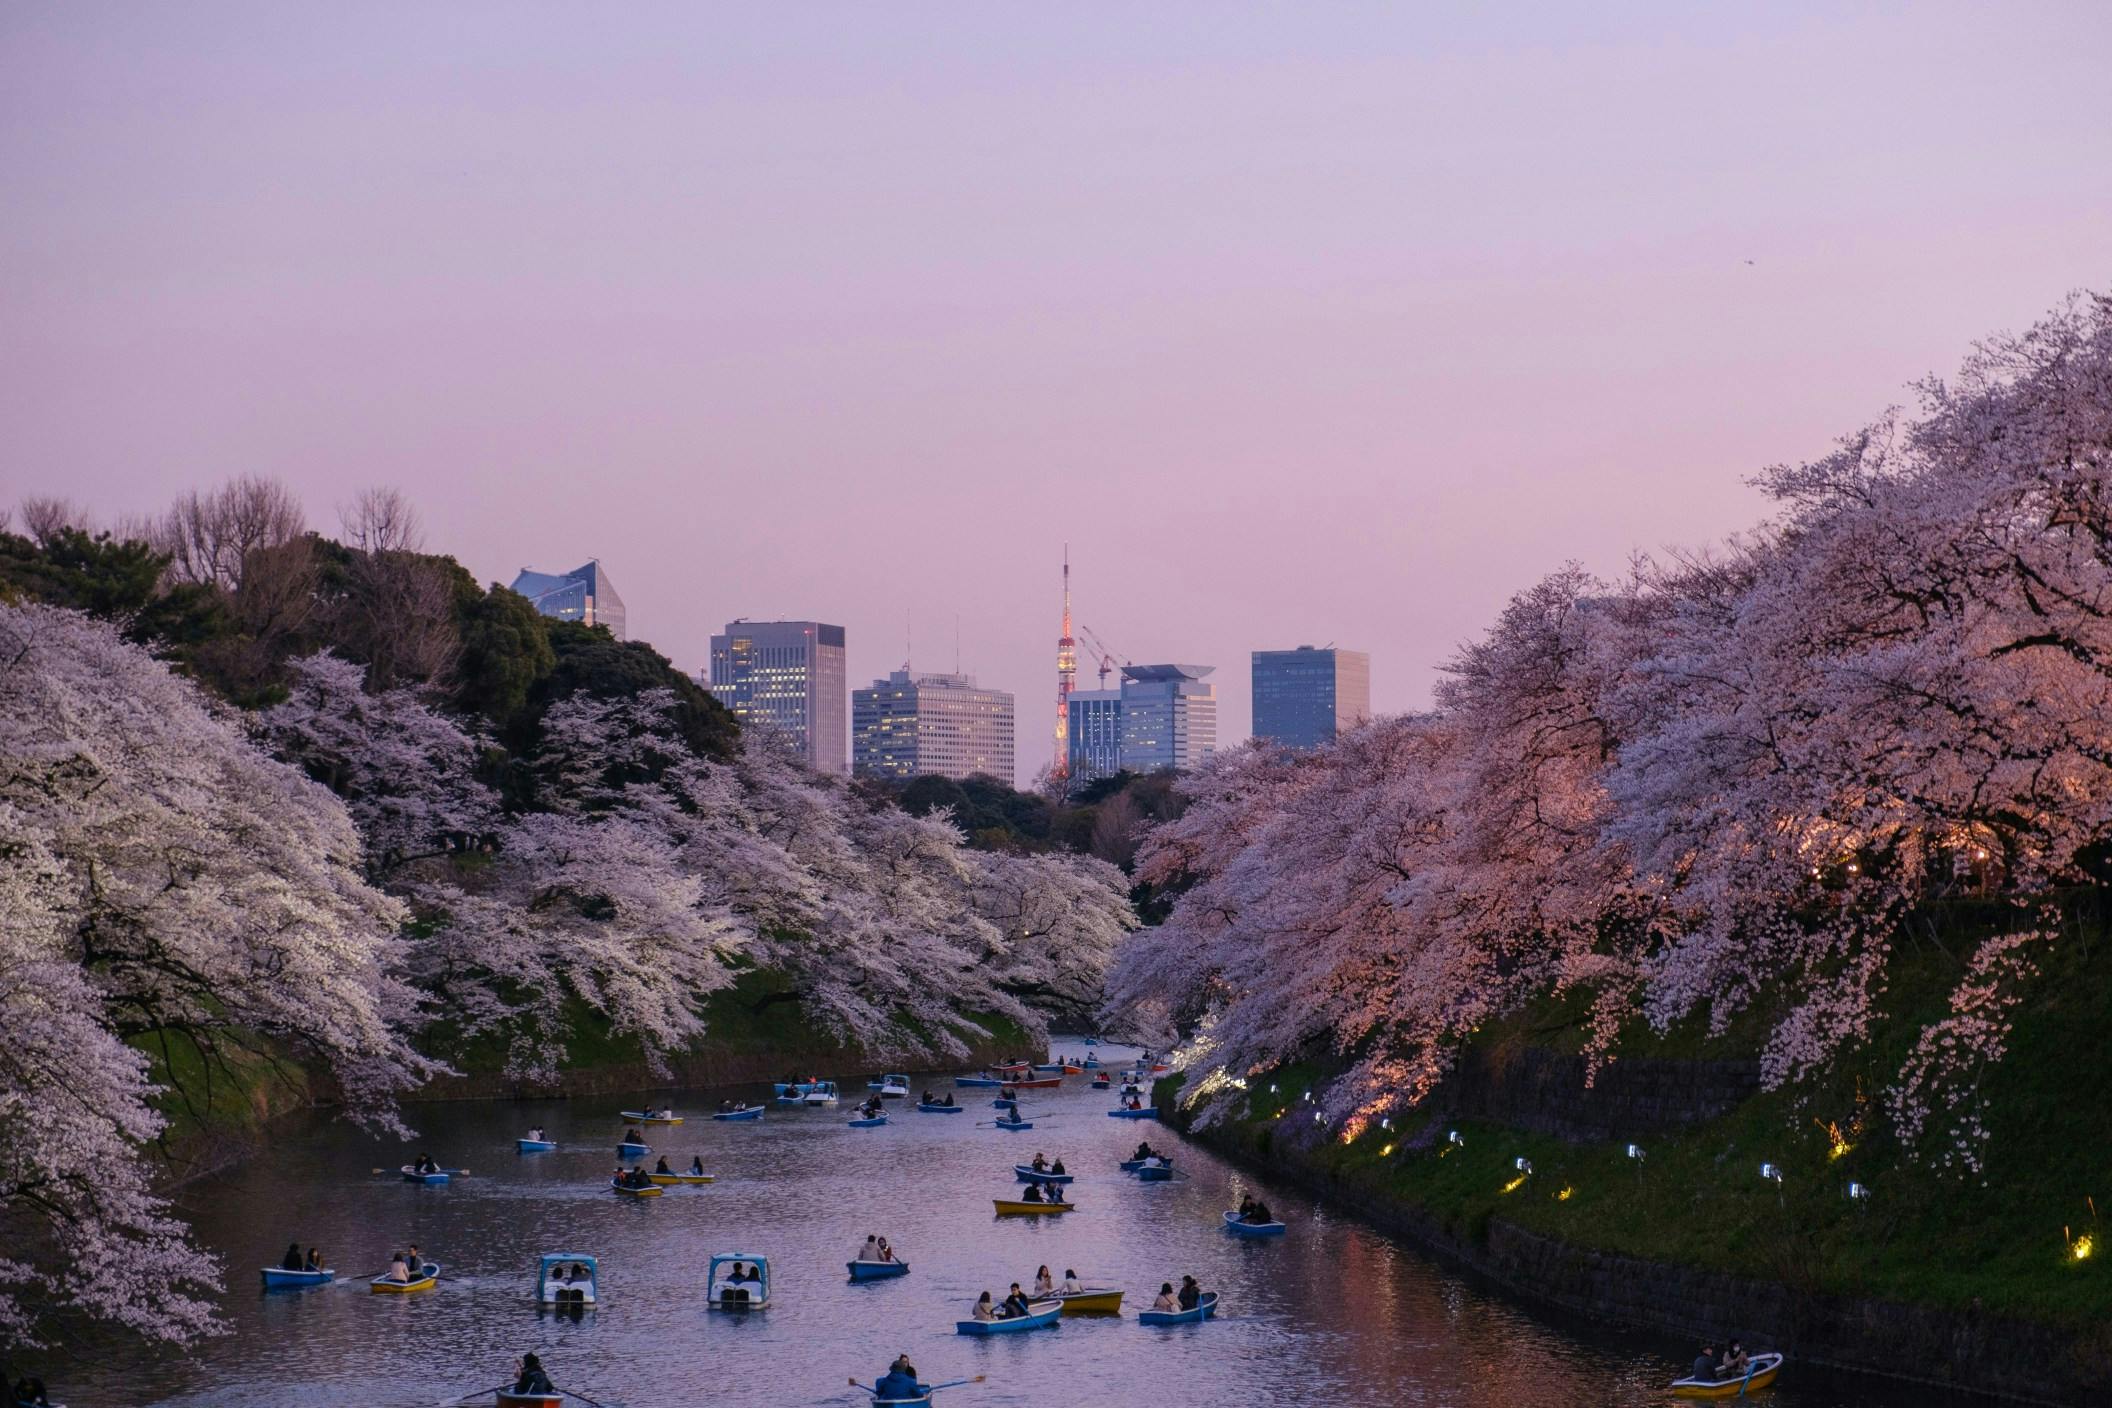 A lake in Tokyo with people kayaking and a city skyline in the background during a lavender colored sunset and cherry blossom season.  